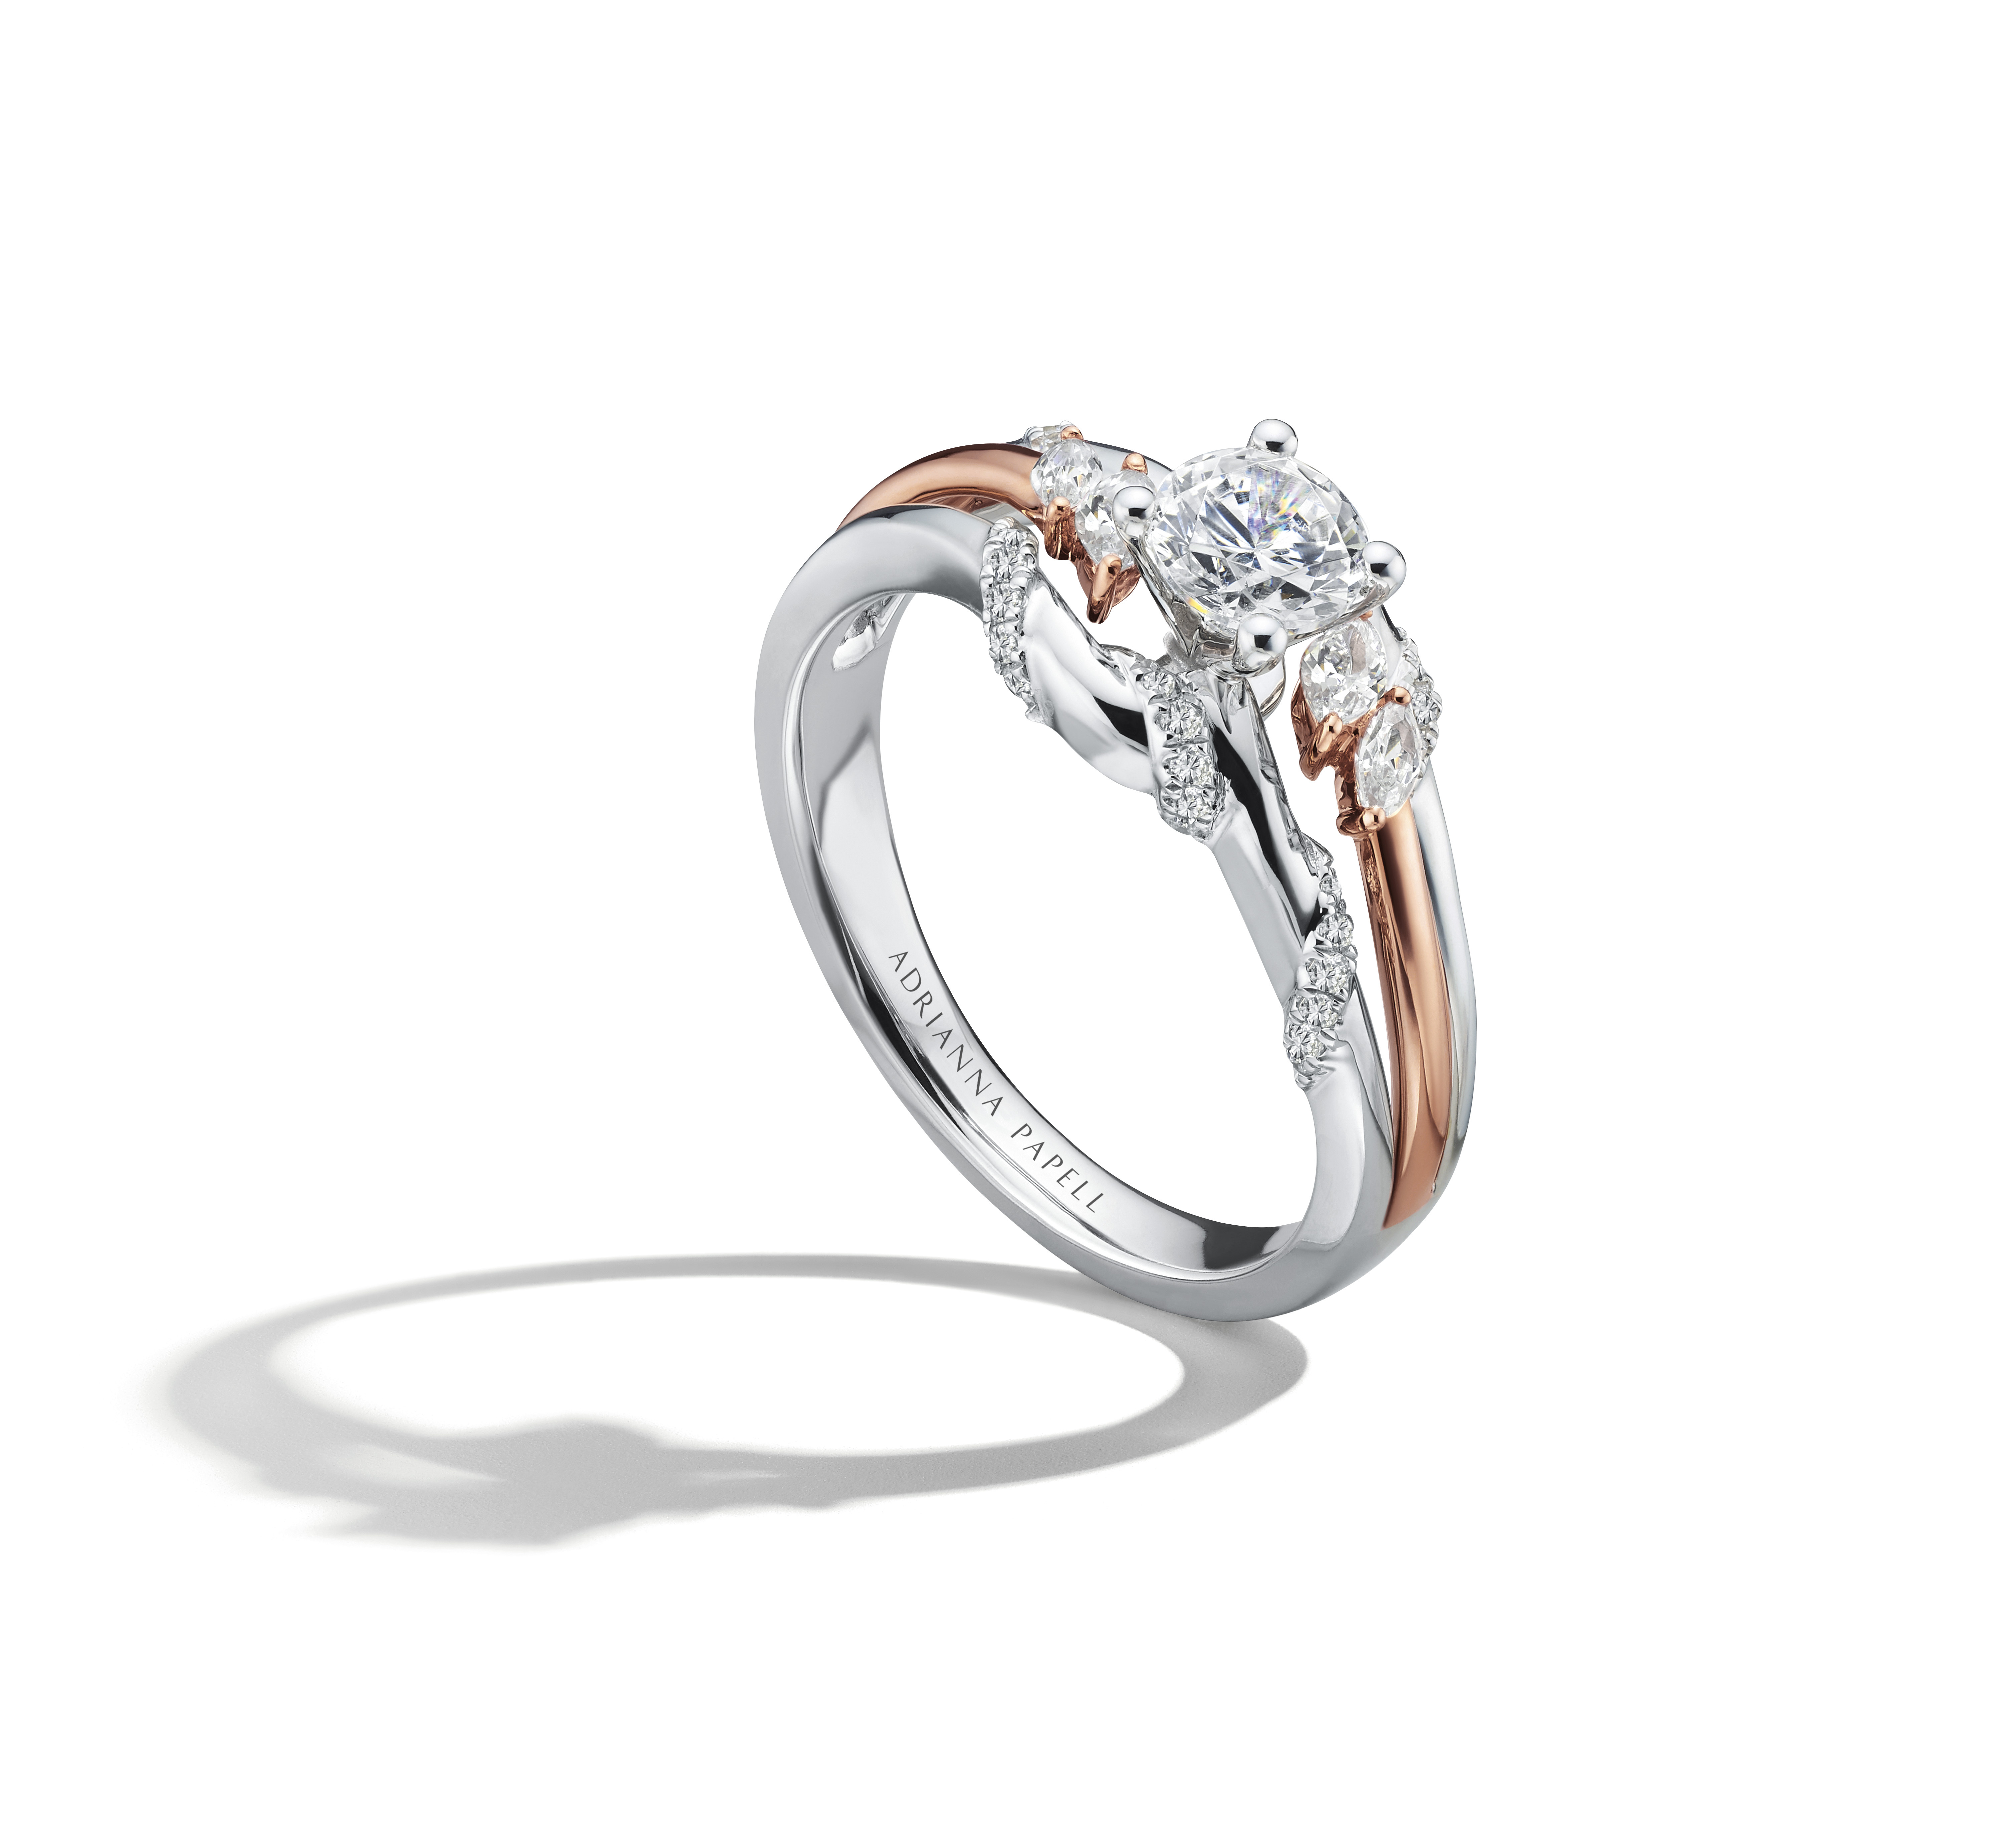 Kay® Jewelers Announces Exclusive 